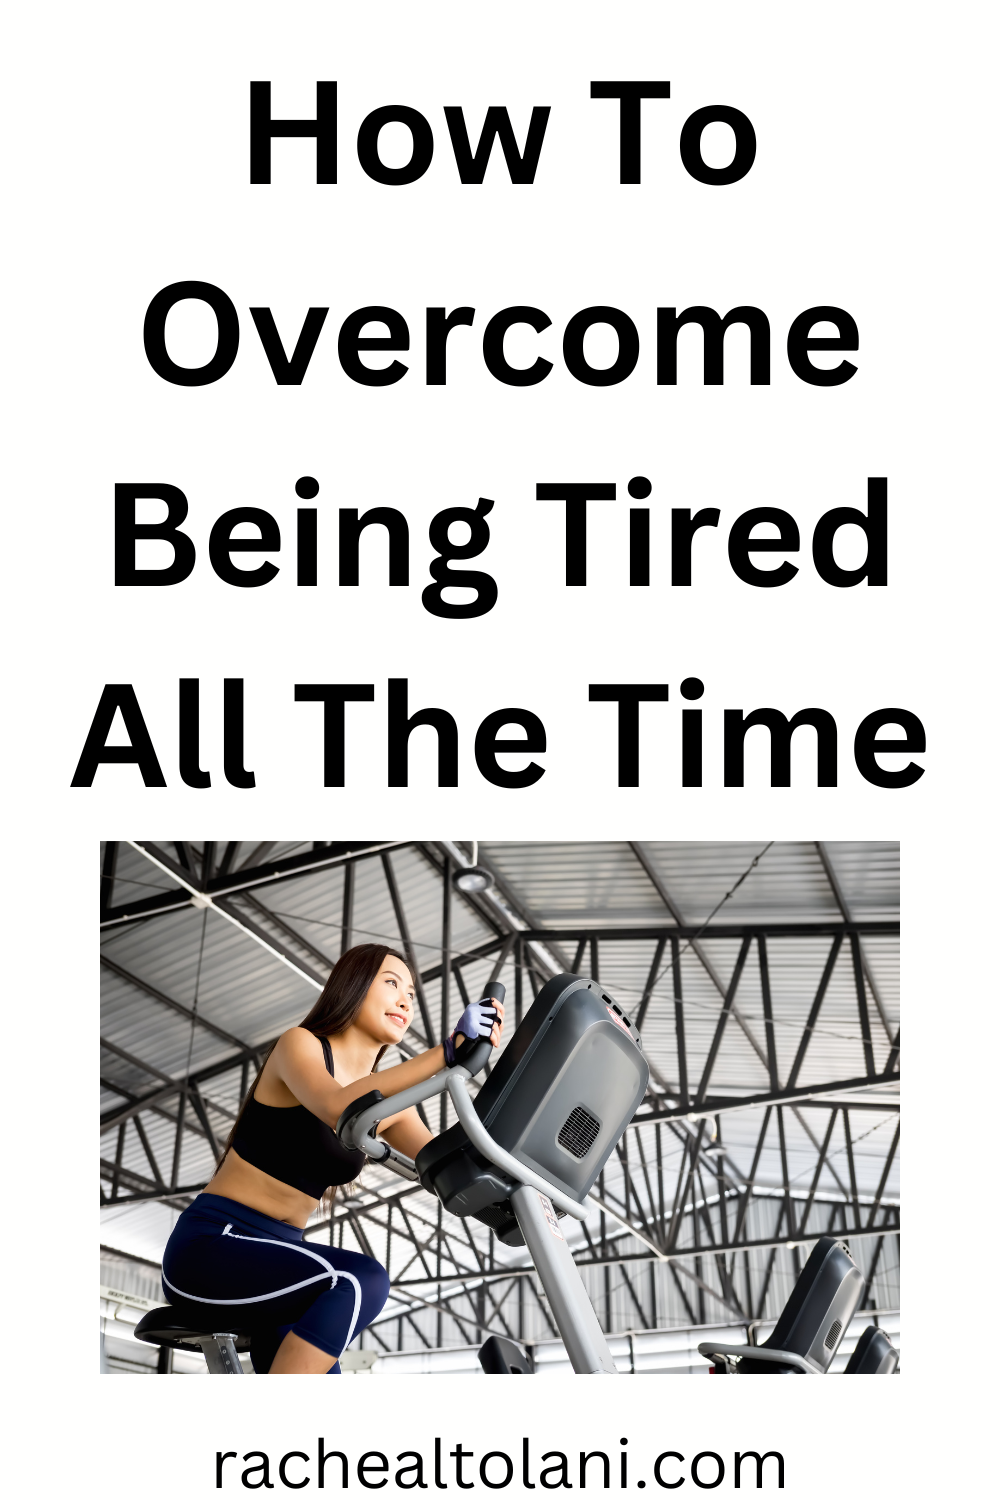 How to overcome being tired